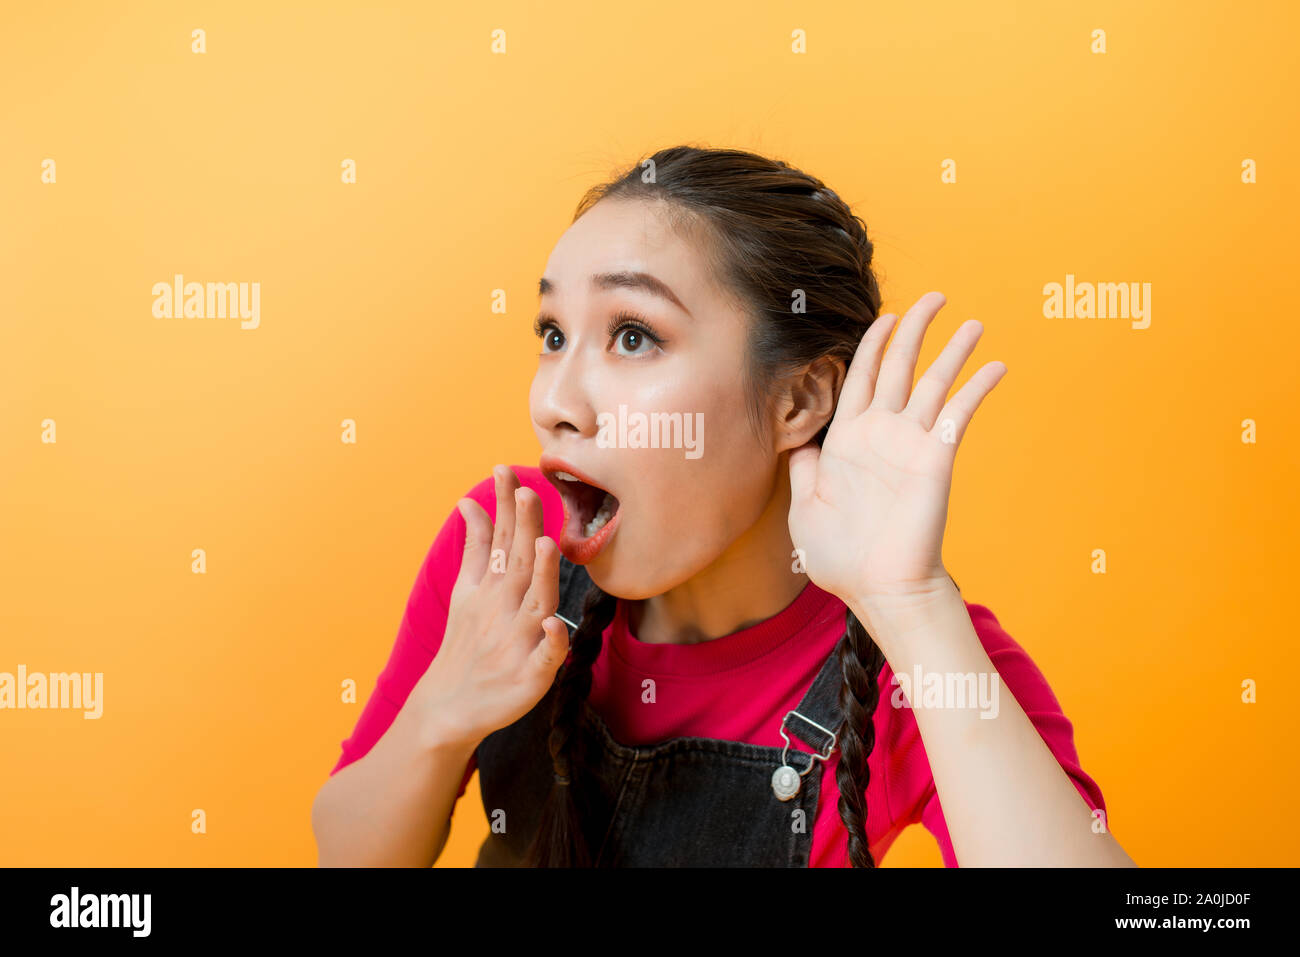 Young teenager Asian girl over isolated yellow background listening gossip by putting hand on the ear Stock Photo